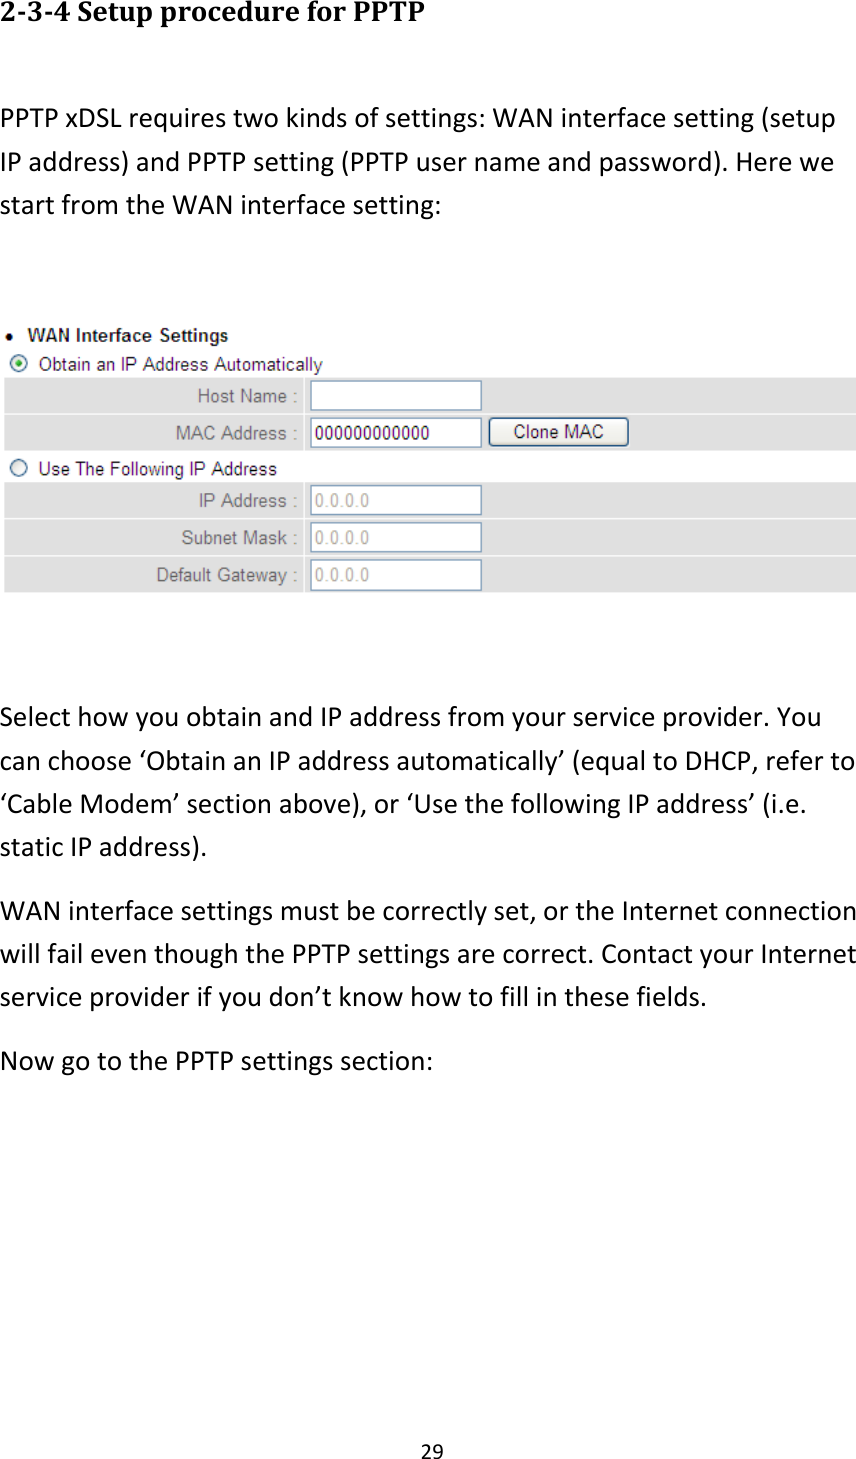 29 2-3-4 Setup procedure for PPTP  PPTP xDSL requires two kinds of settings: WAN interface setting (setup IP address) and PPTP setting (PPTP user name and password). Here we start from the WAN interface setting:    Select how you obtain and IP address from your service provider. You can choose ‘Obtain an IP address automatically’ (equal to DHCP, refer to ‘Cable Modem’ section above), or ‘Use the following IP address’ (i.e. static IP address).   WAN interface settings must be correctly set, or the Internet connection will fail even though the PPTP settings are correct. Contact your Internet service provider if you don’t know how to fill in these fields. Now go to the PPTP settings section:  